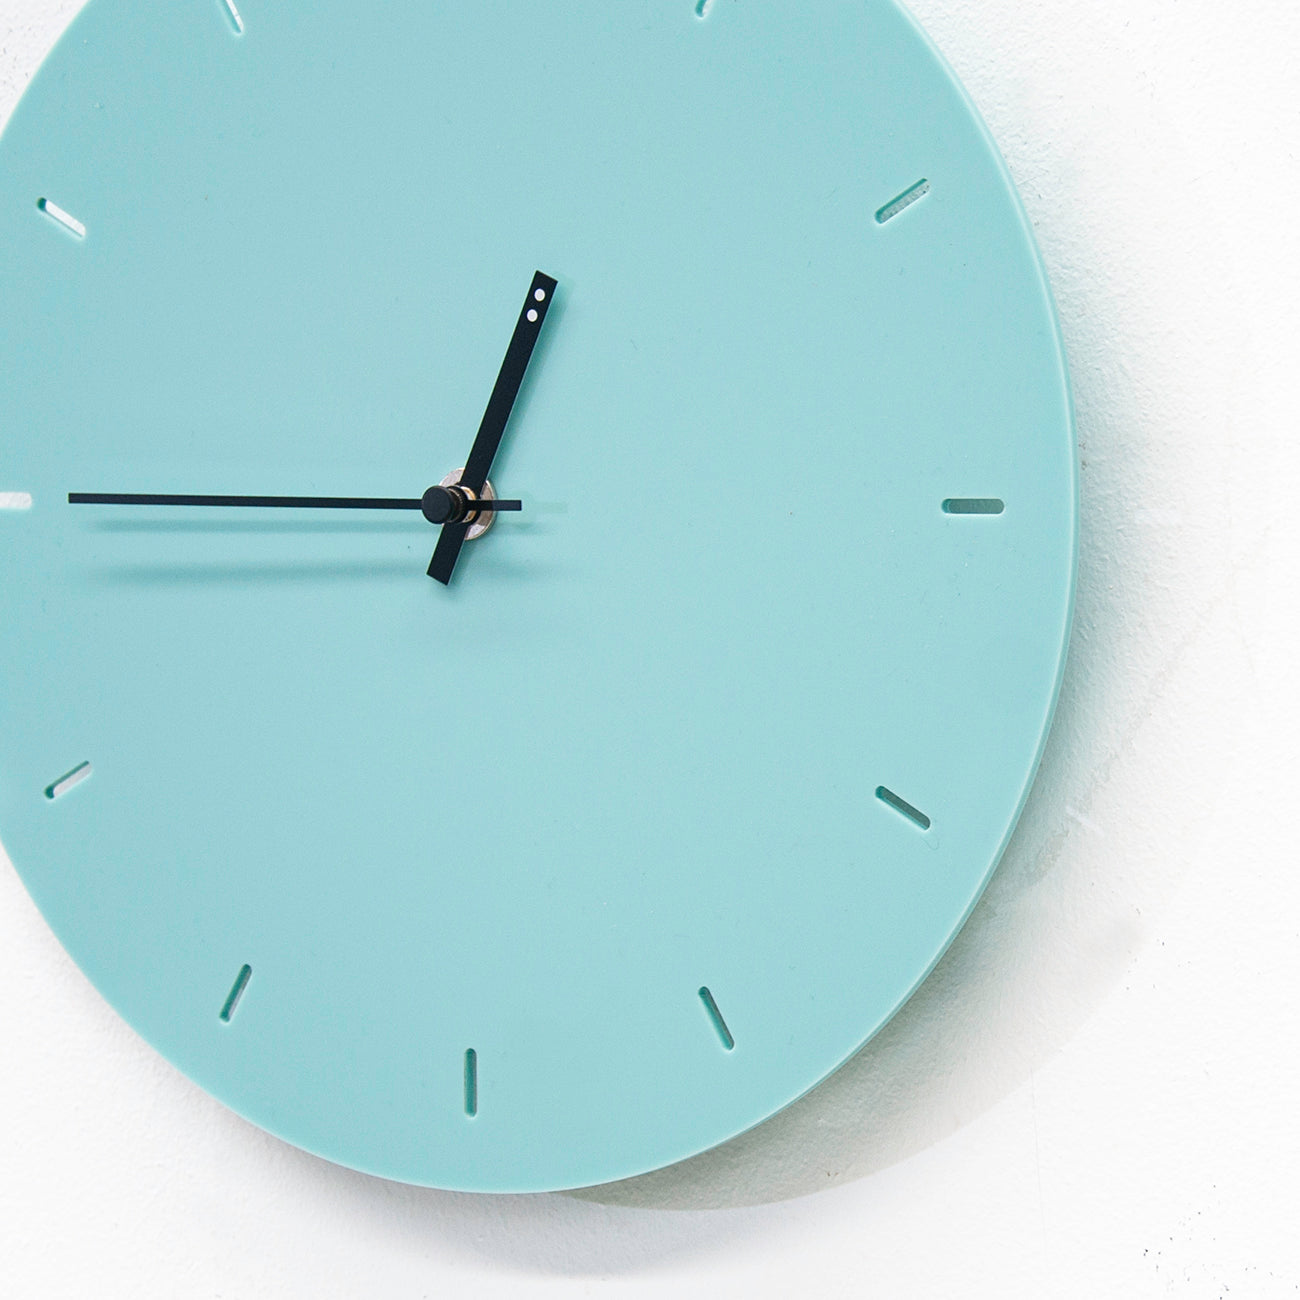 Minimal clock - Turquoise with Lines